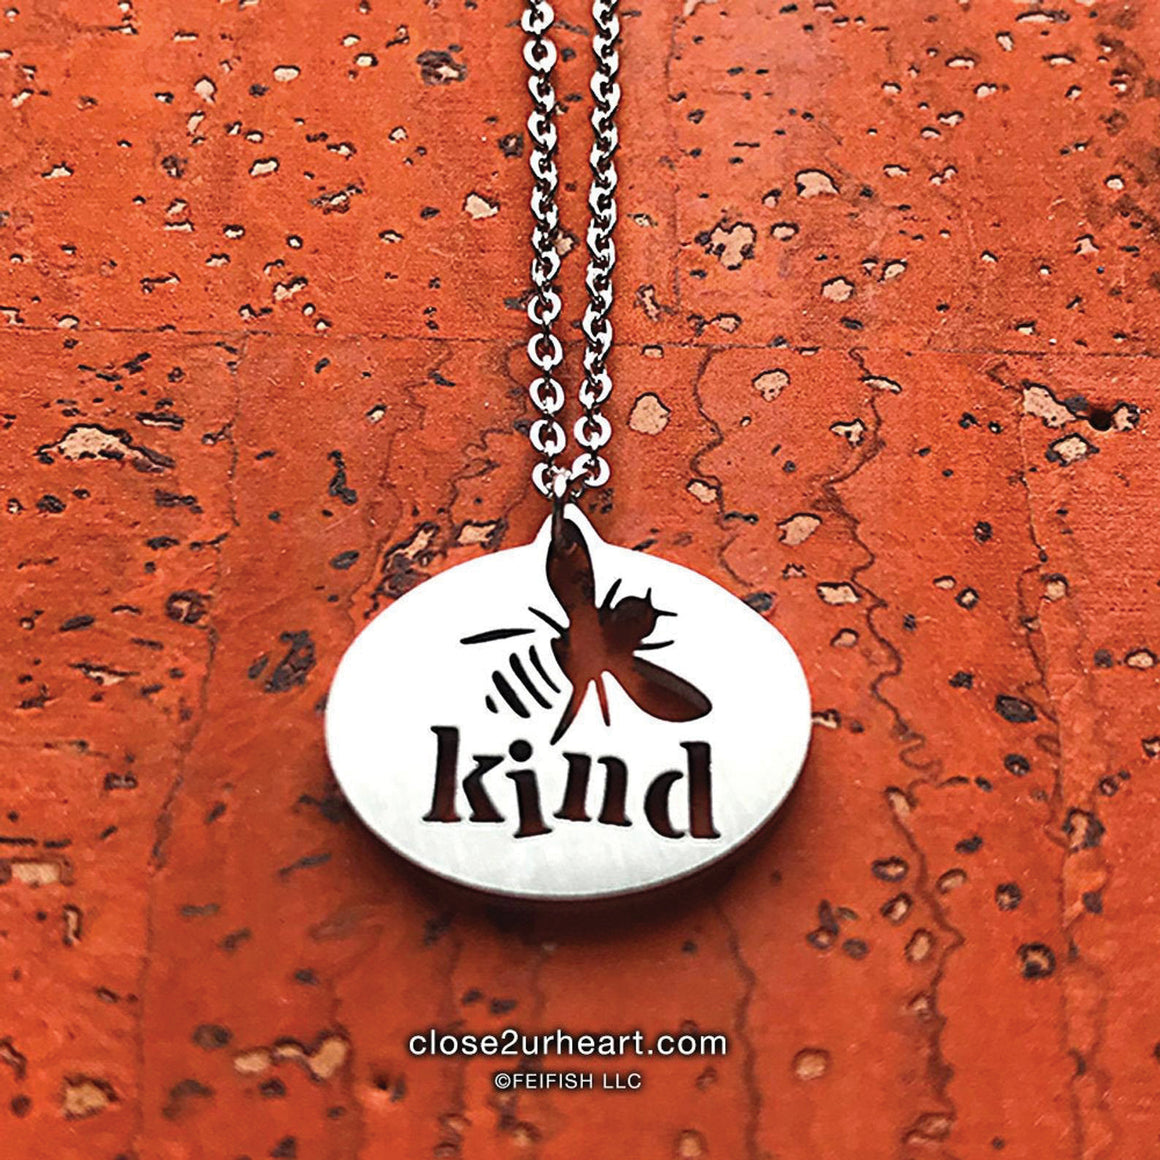 Bee Kind Necklace by Close 2 UR Heart